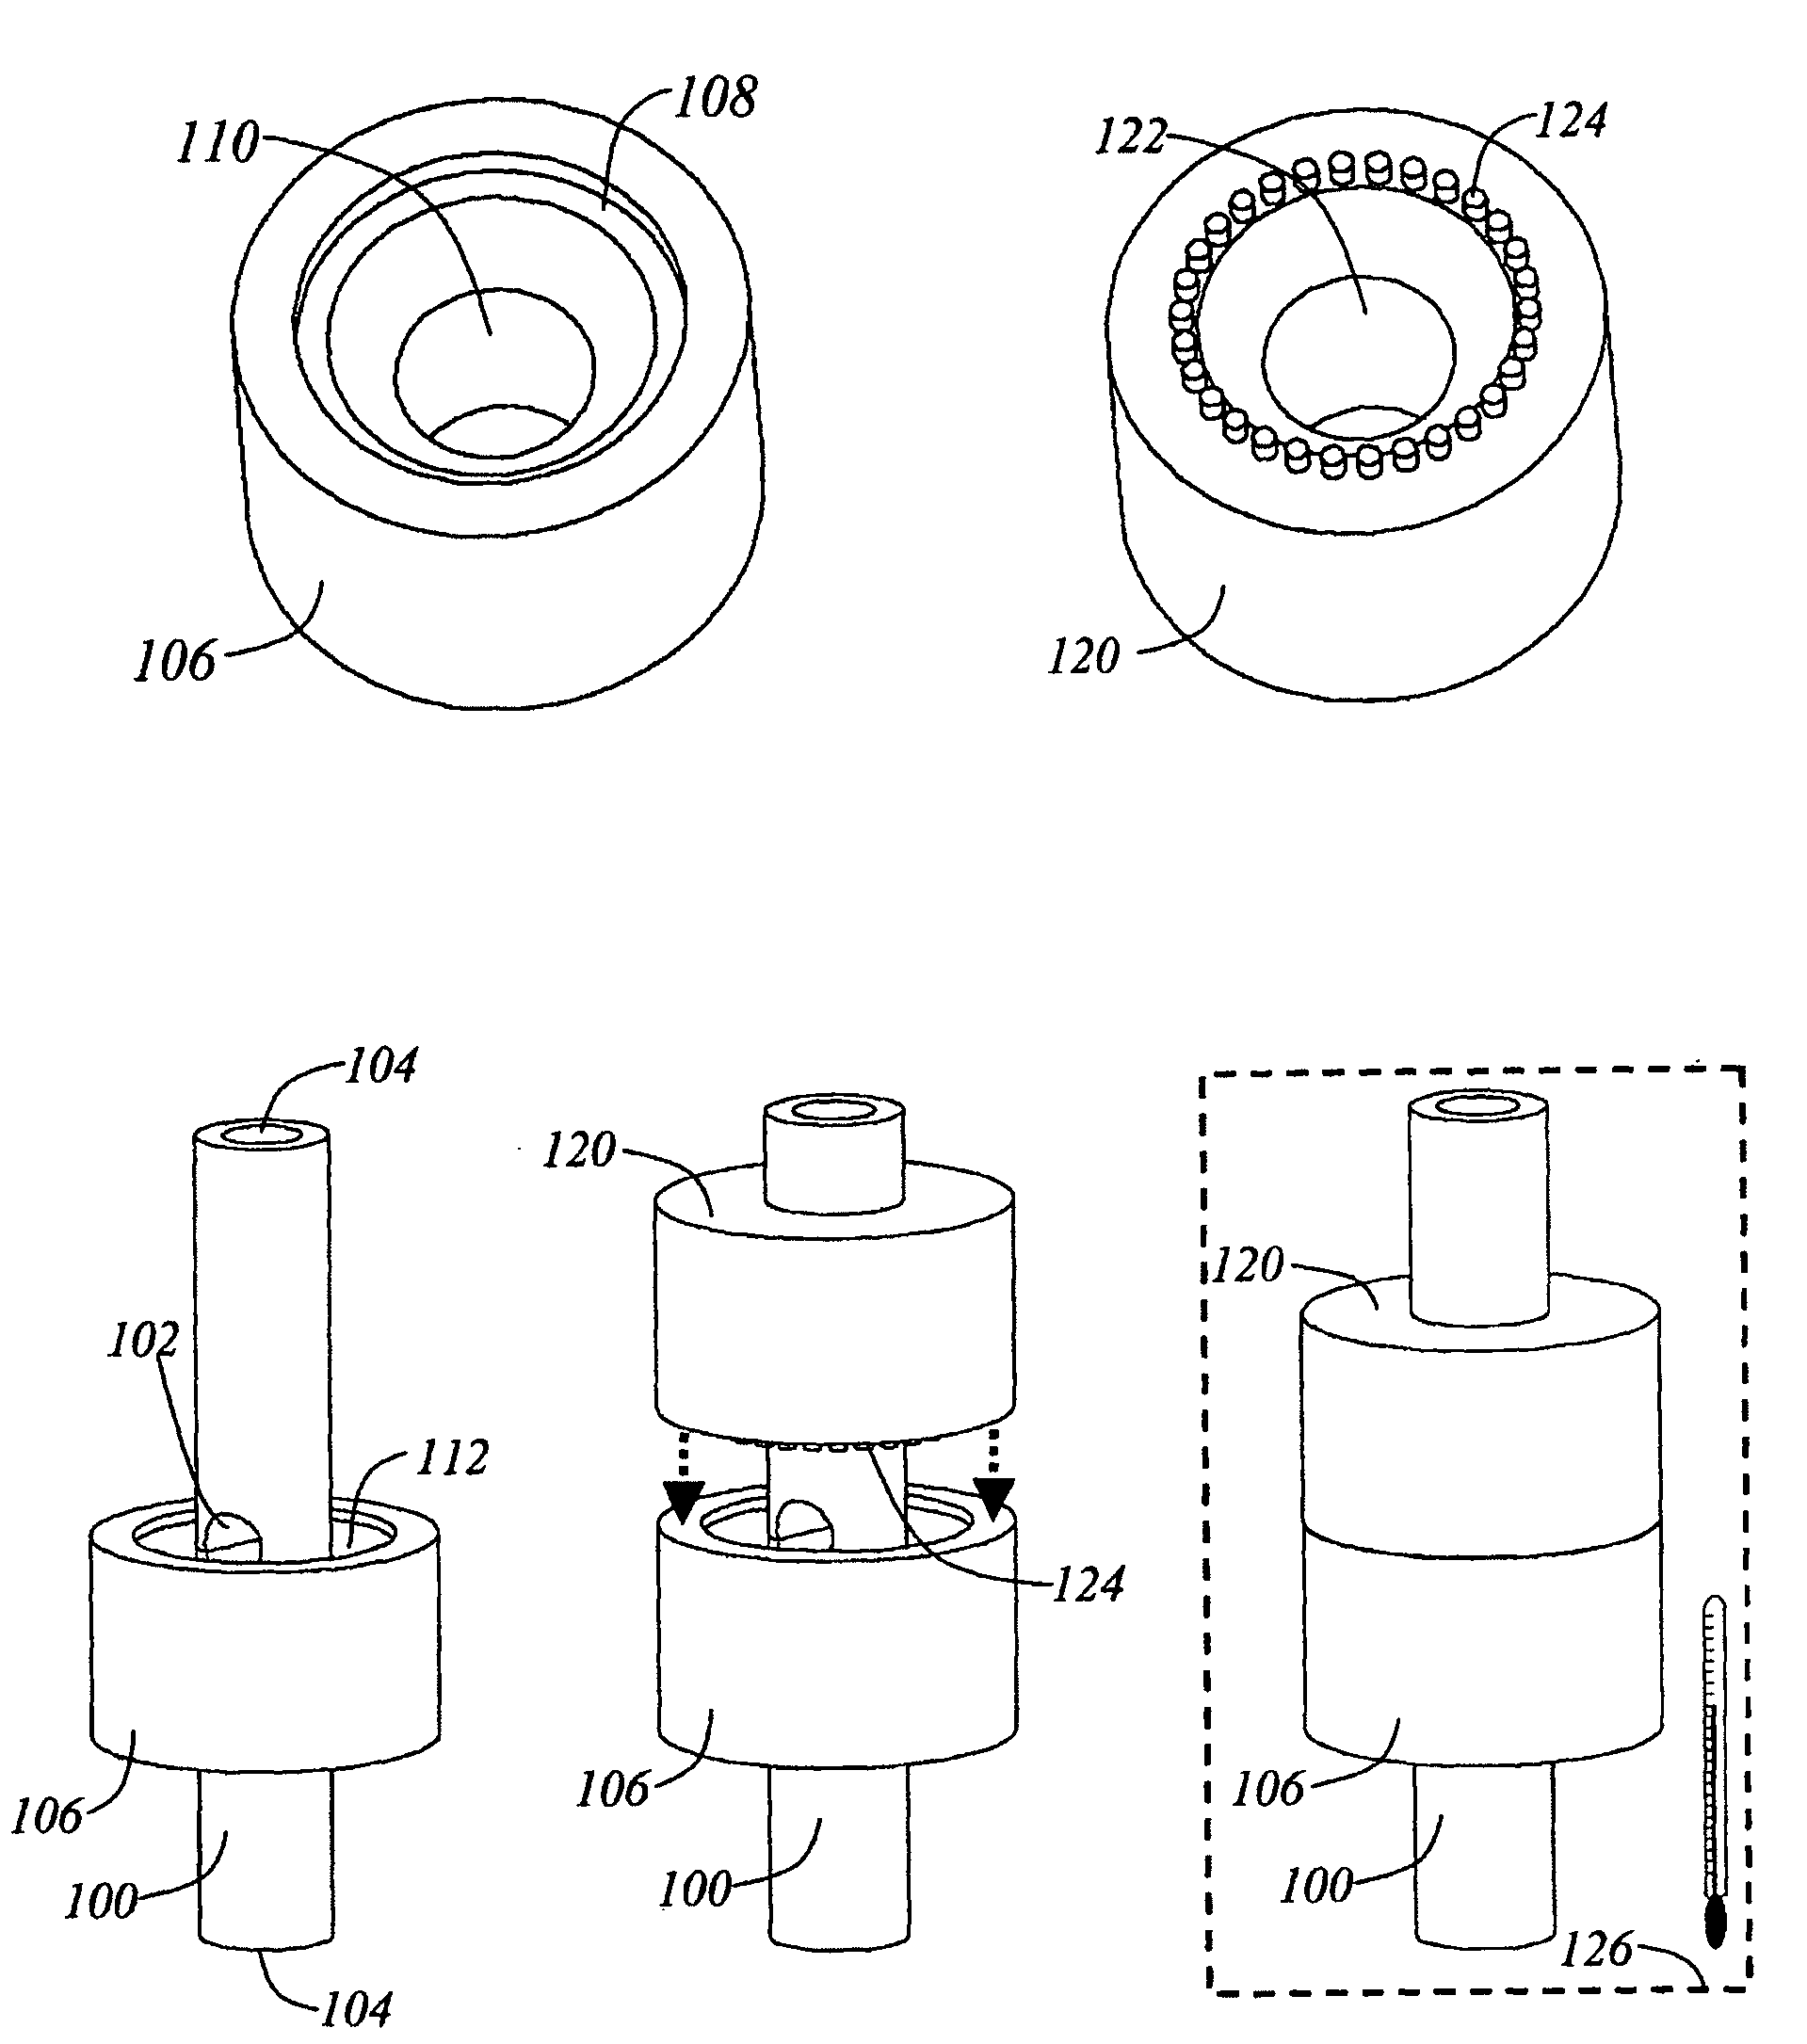 Methods,  apparatus and systems for production, collection, handling, and imaging of tissue sections